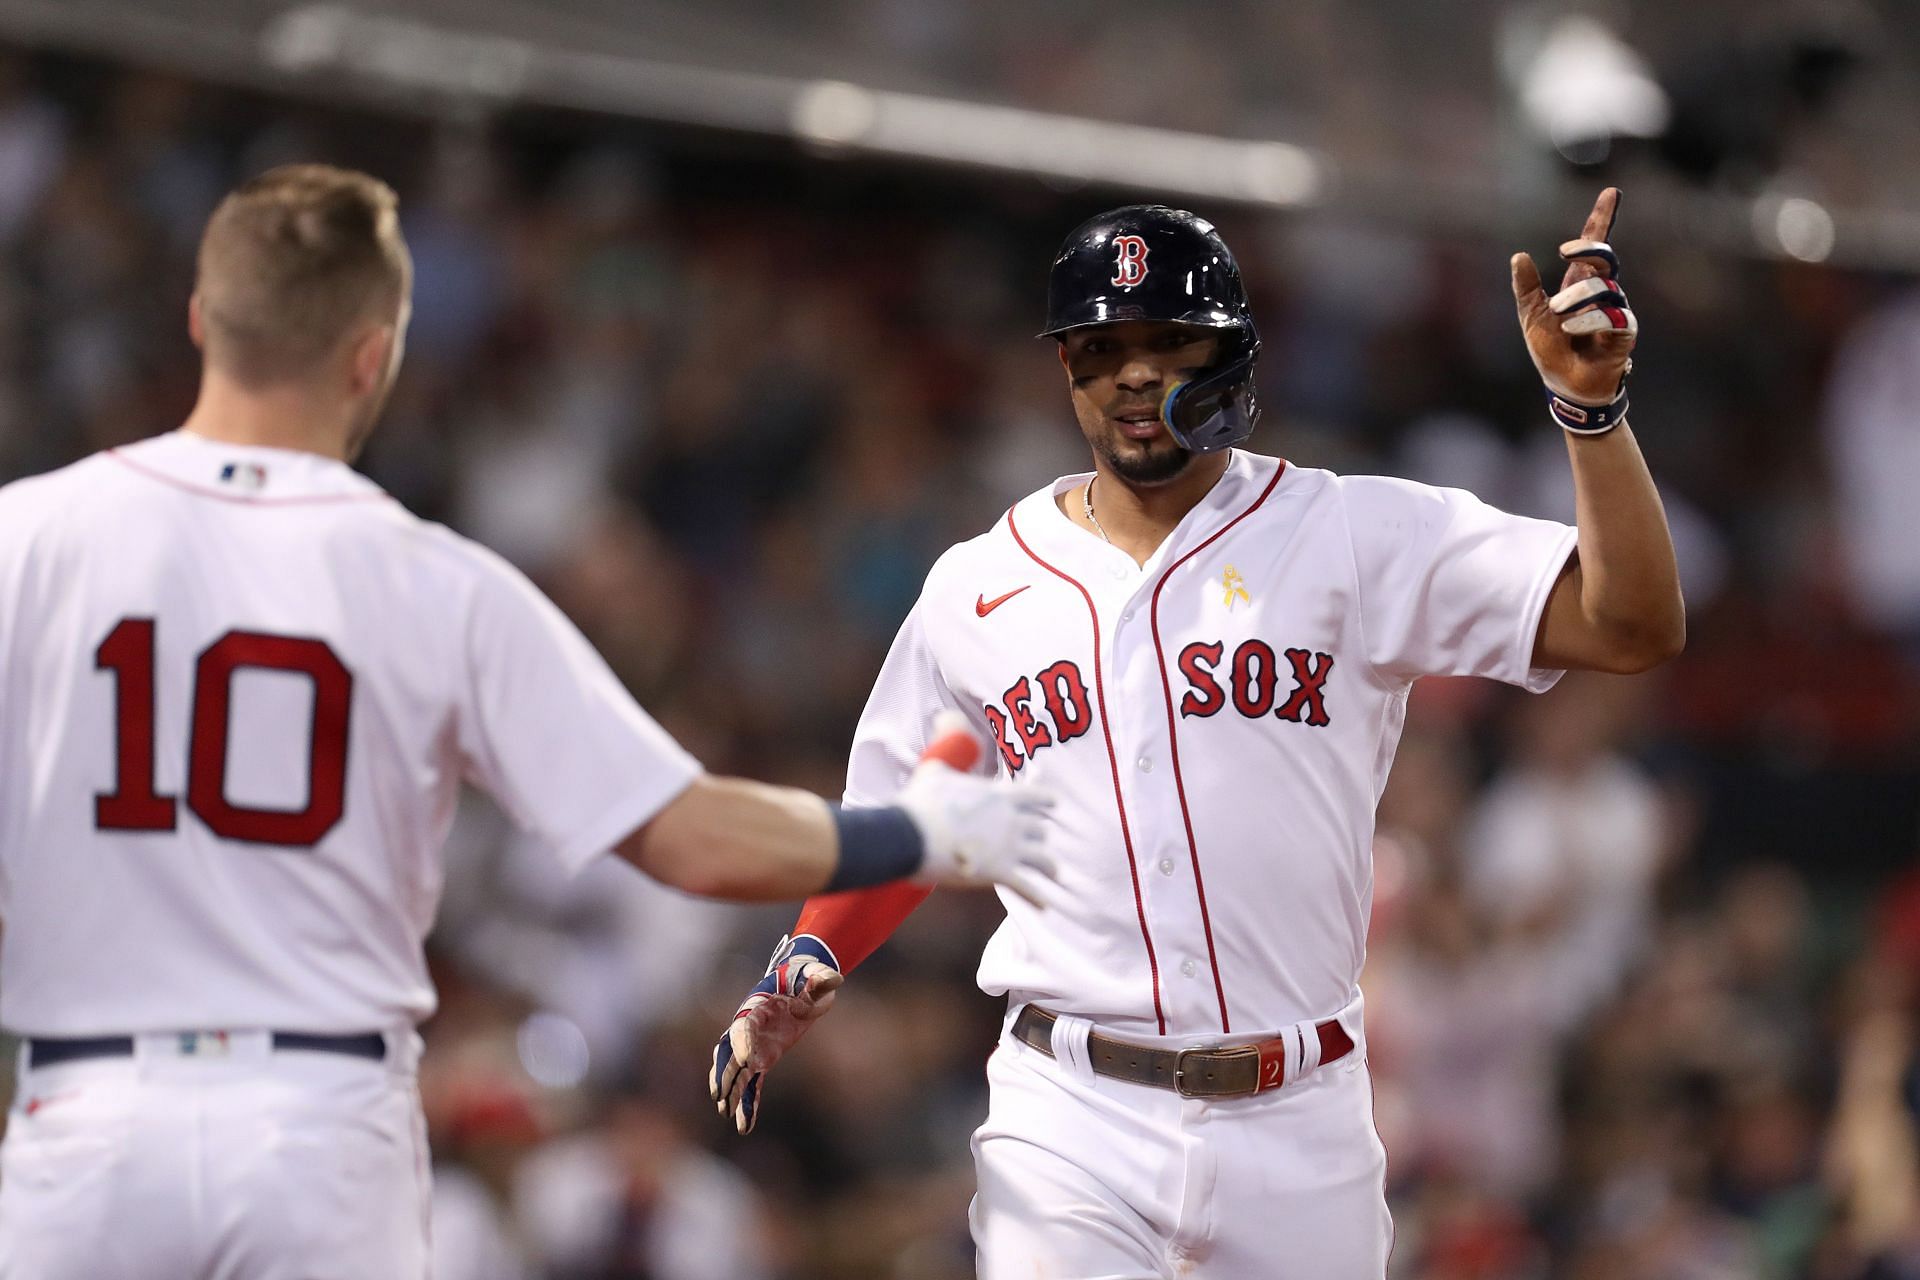 Xander Bogaerts elite start should force Red Sox's hand with contract  demands